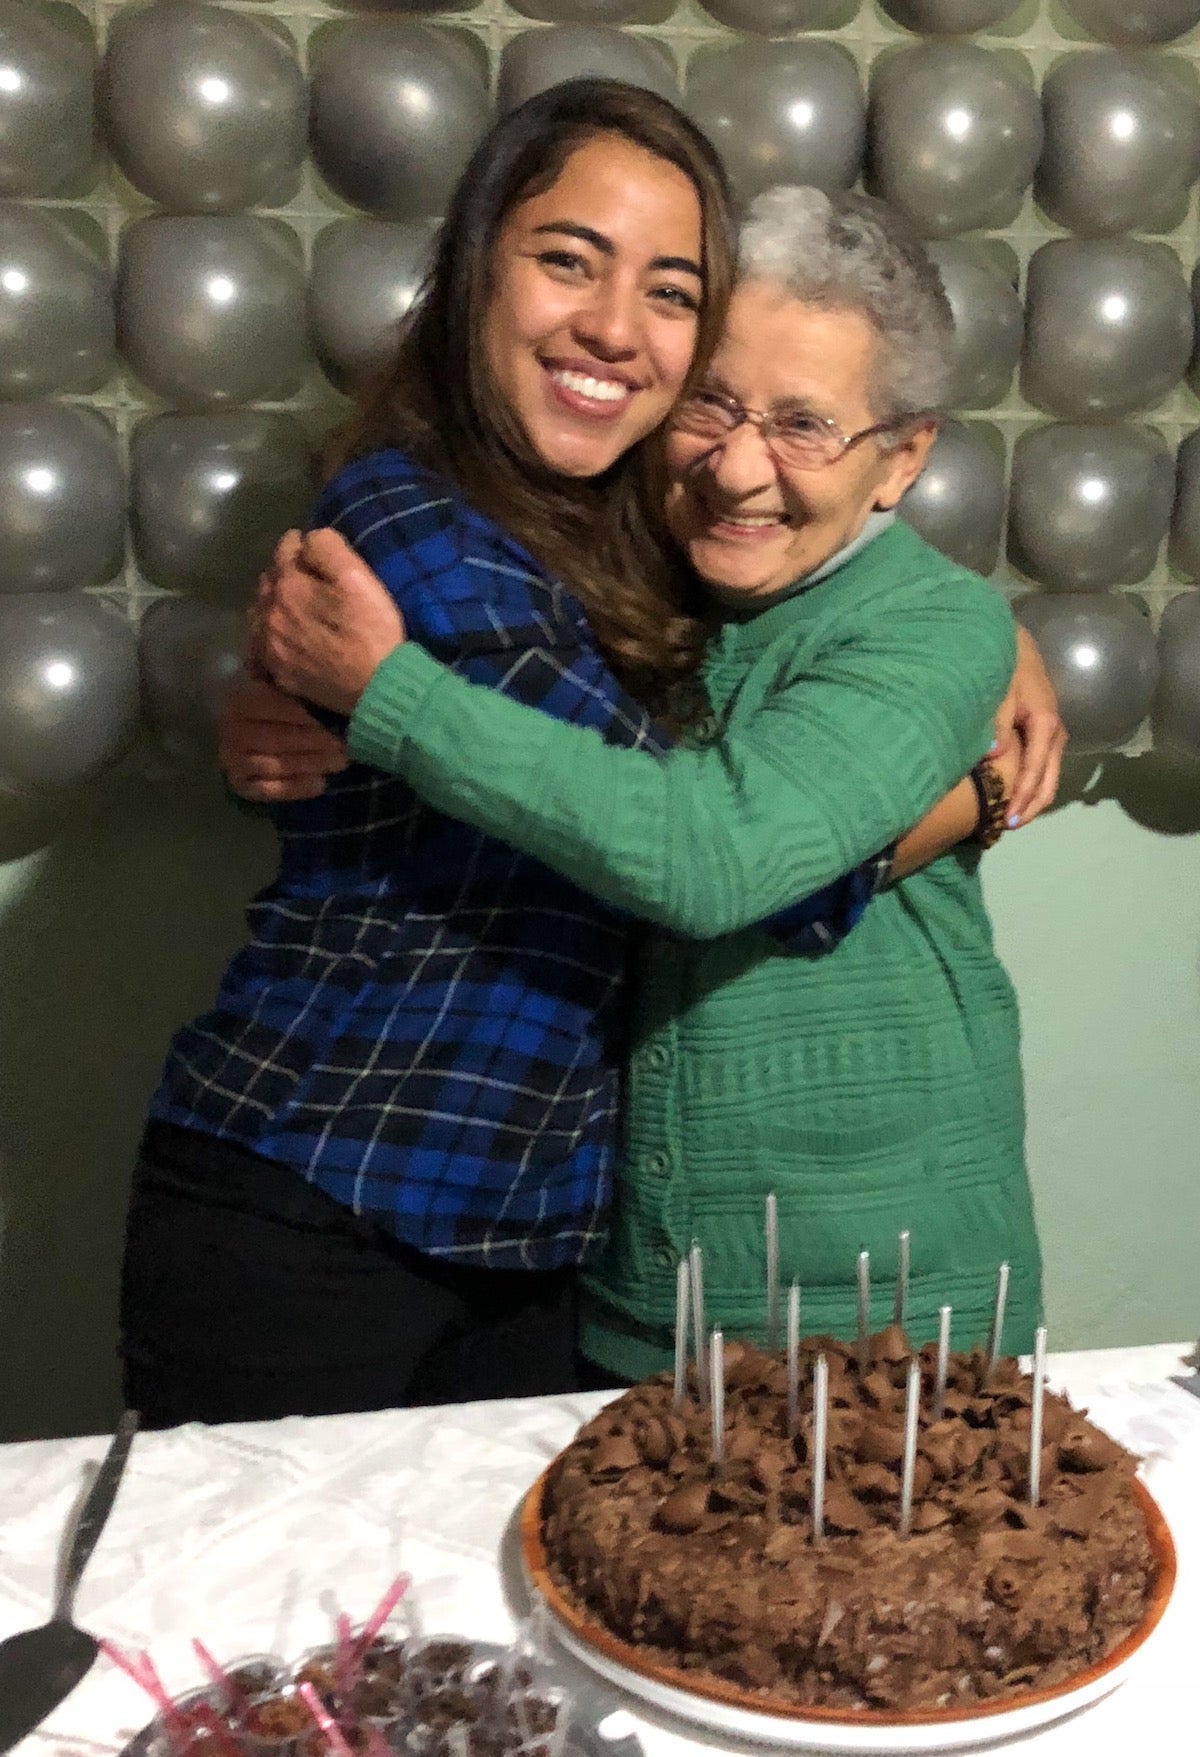 Photo of grandma and granddaughter embracing by birthday cake